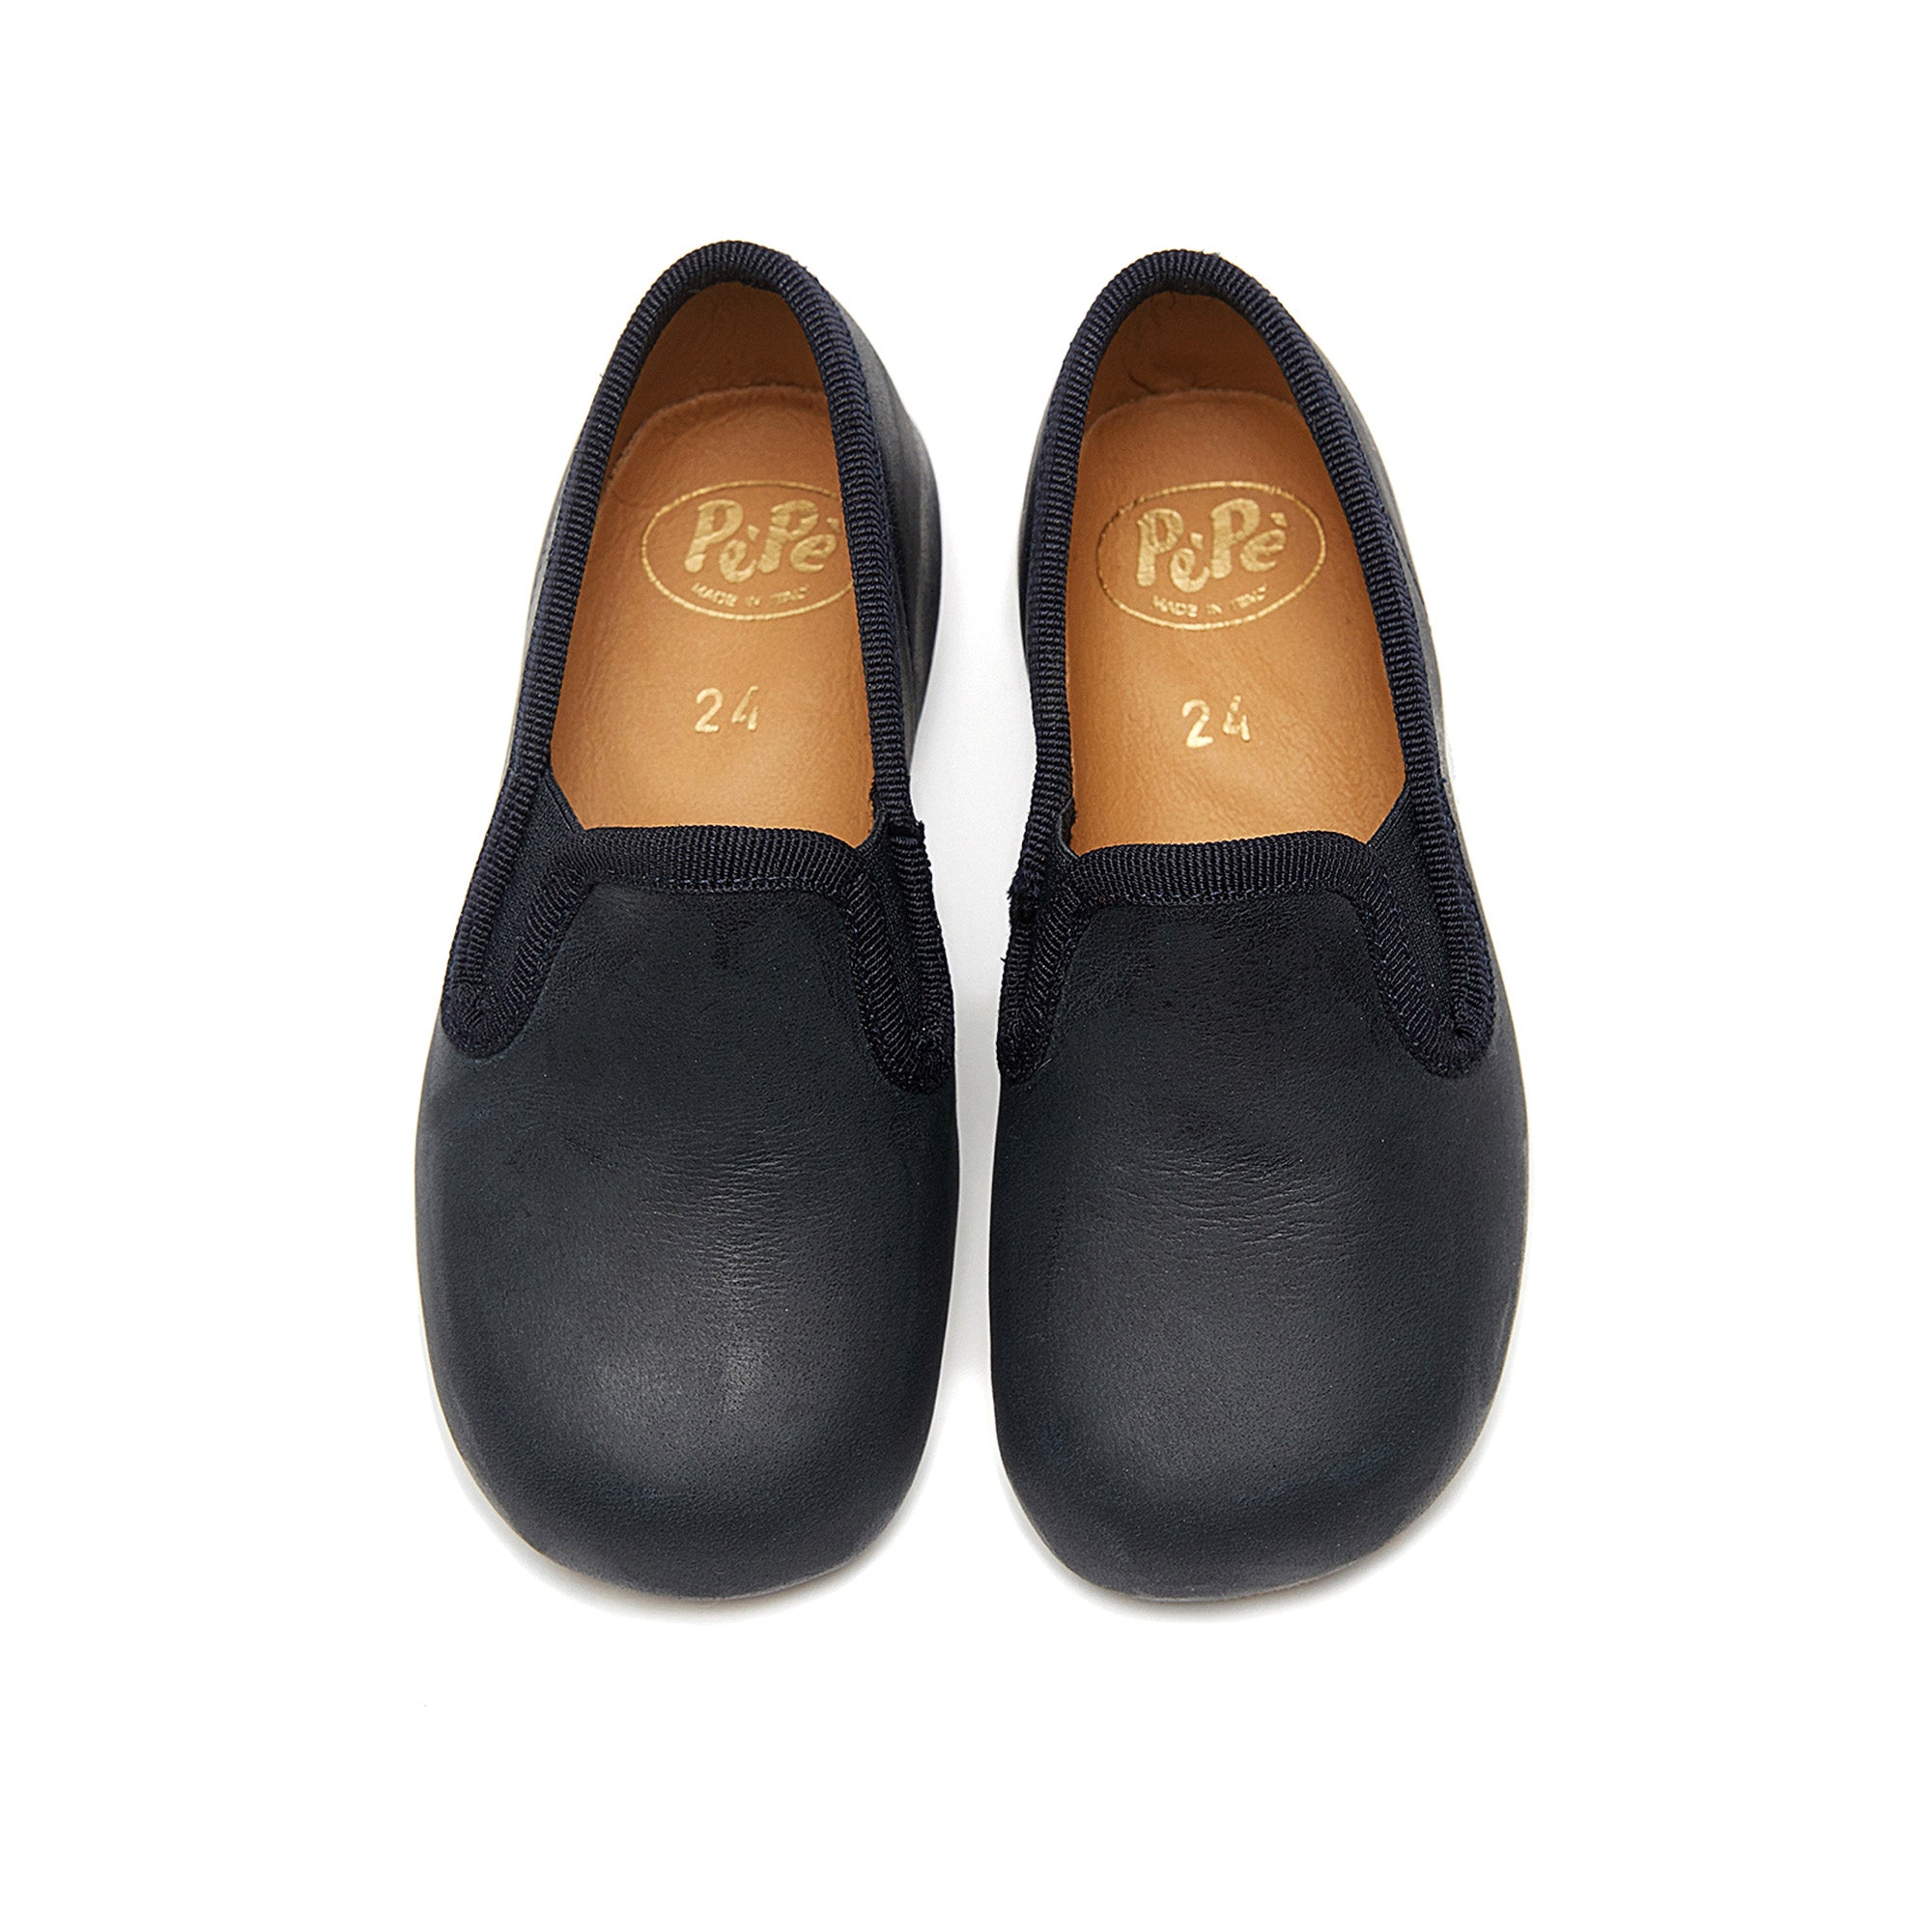 Boys & Girls Navy Leather Shoes